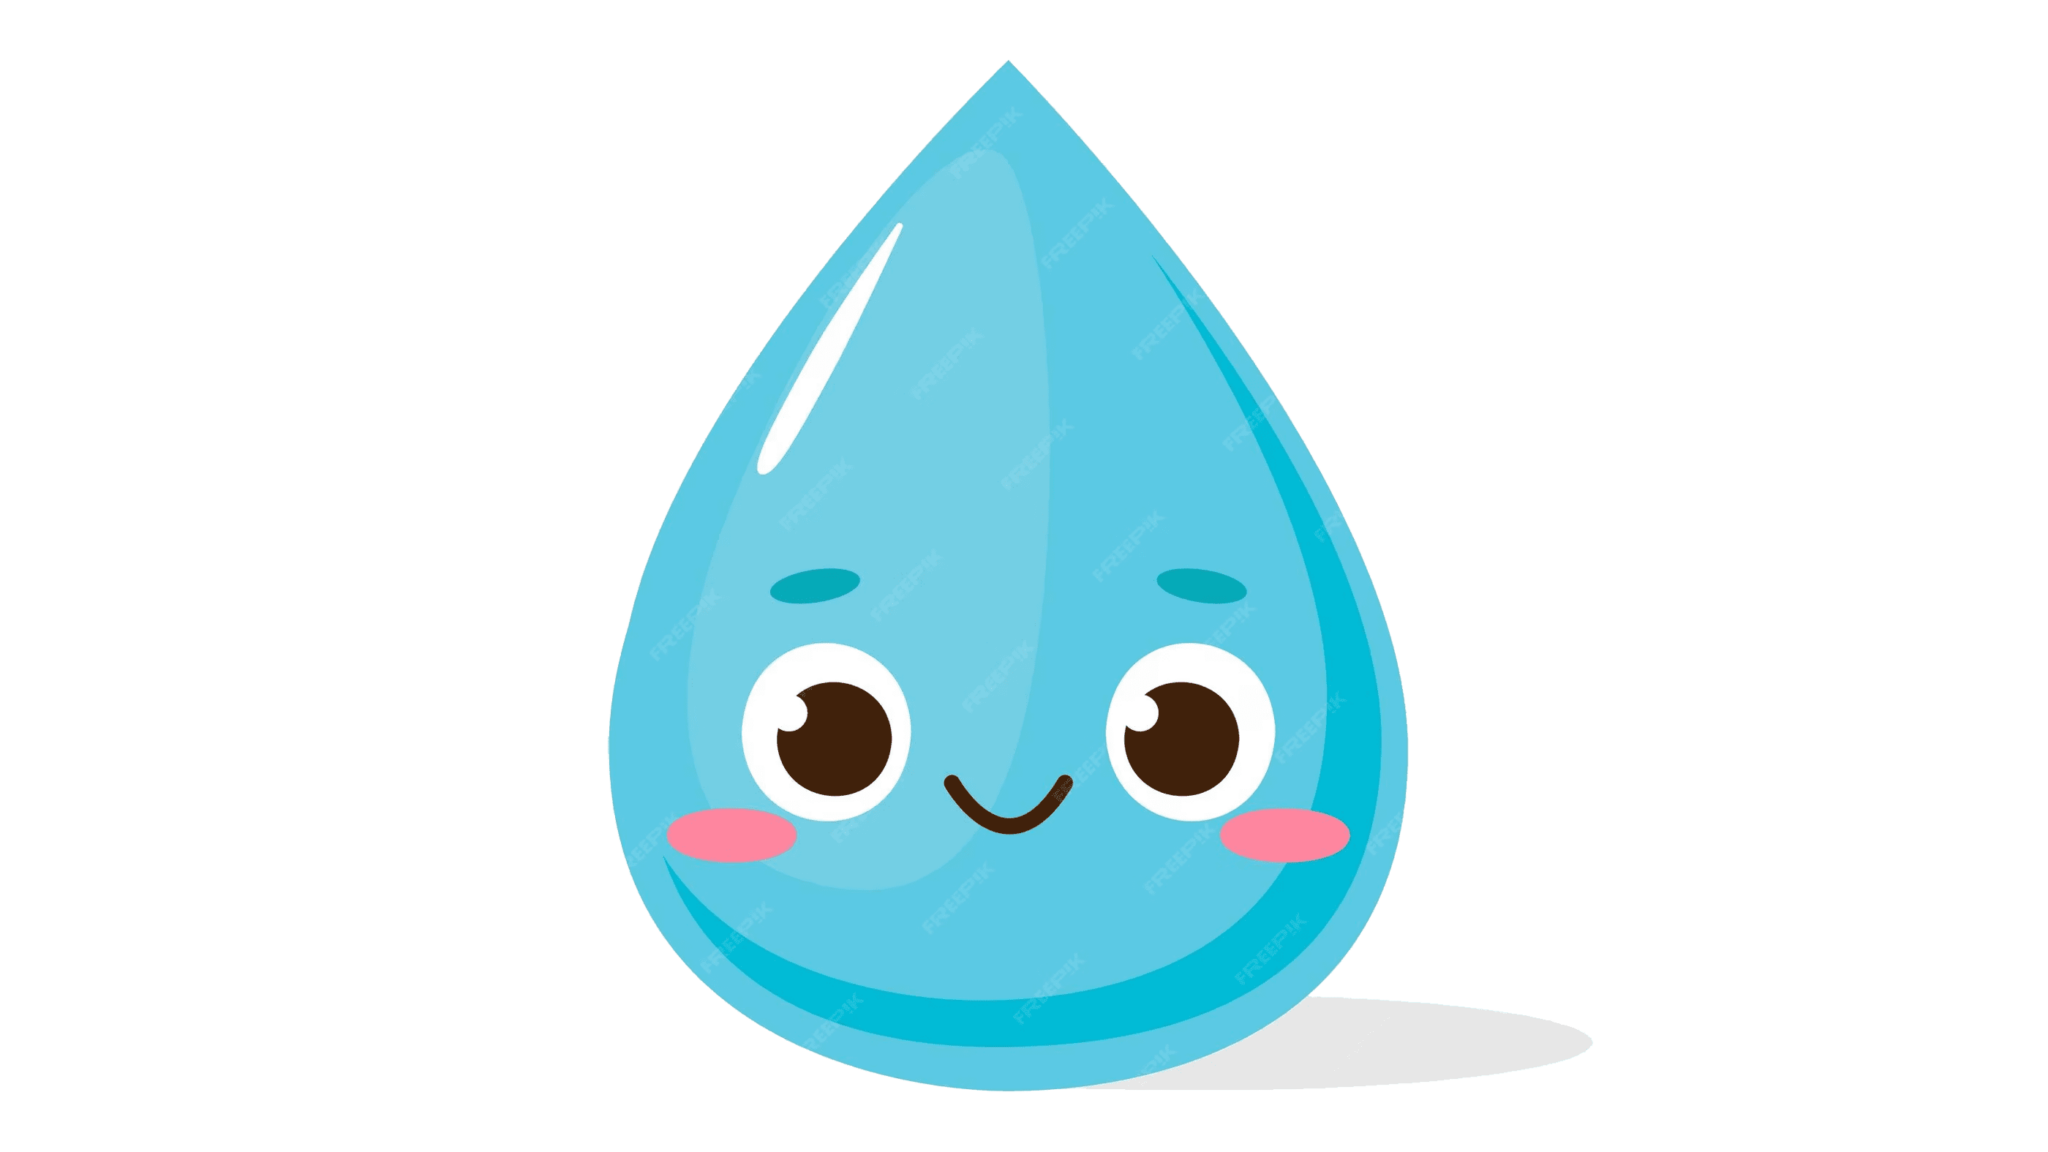 Water Emoji - what it means and how to use it.